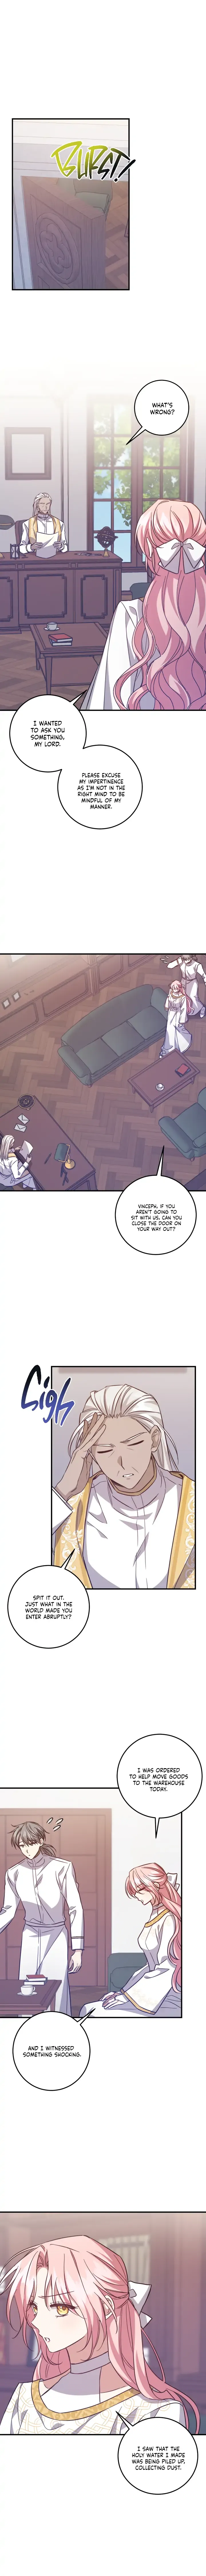 I Raised the Villains Preciously Chapter 46 - Page 2